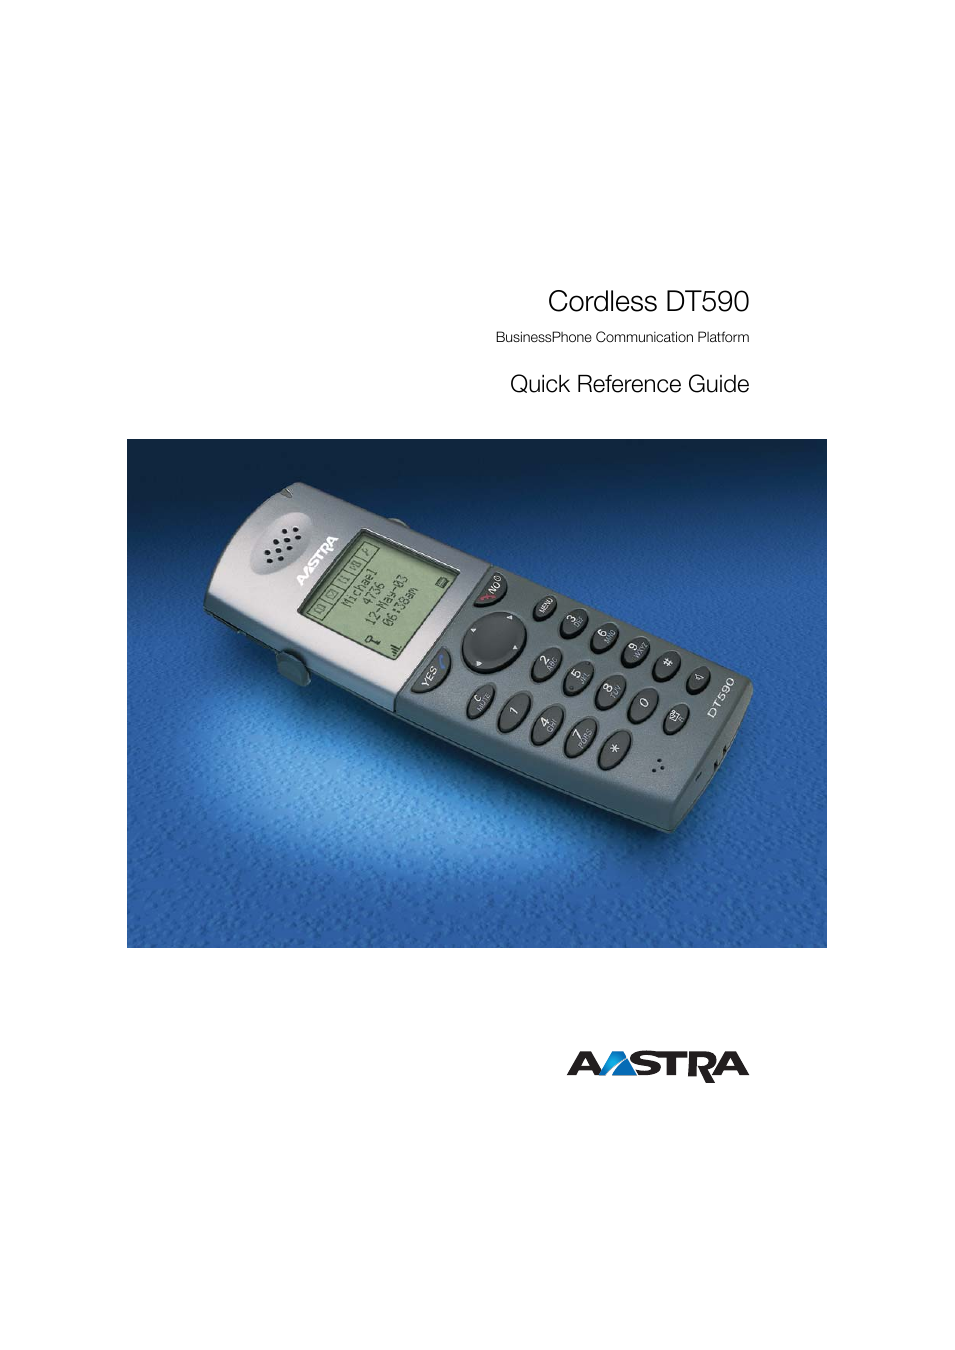 DT590 for BusinessPhone User Guide